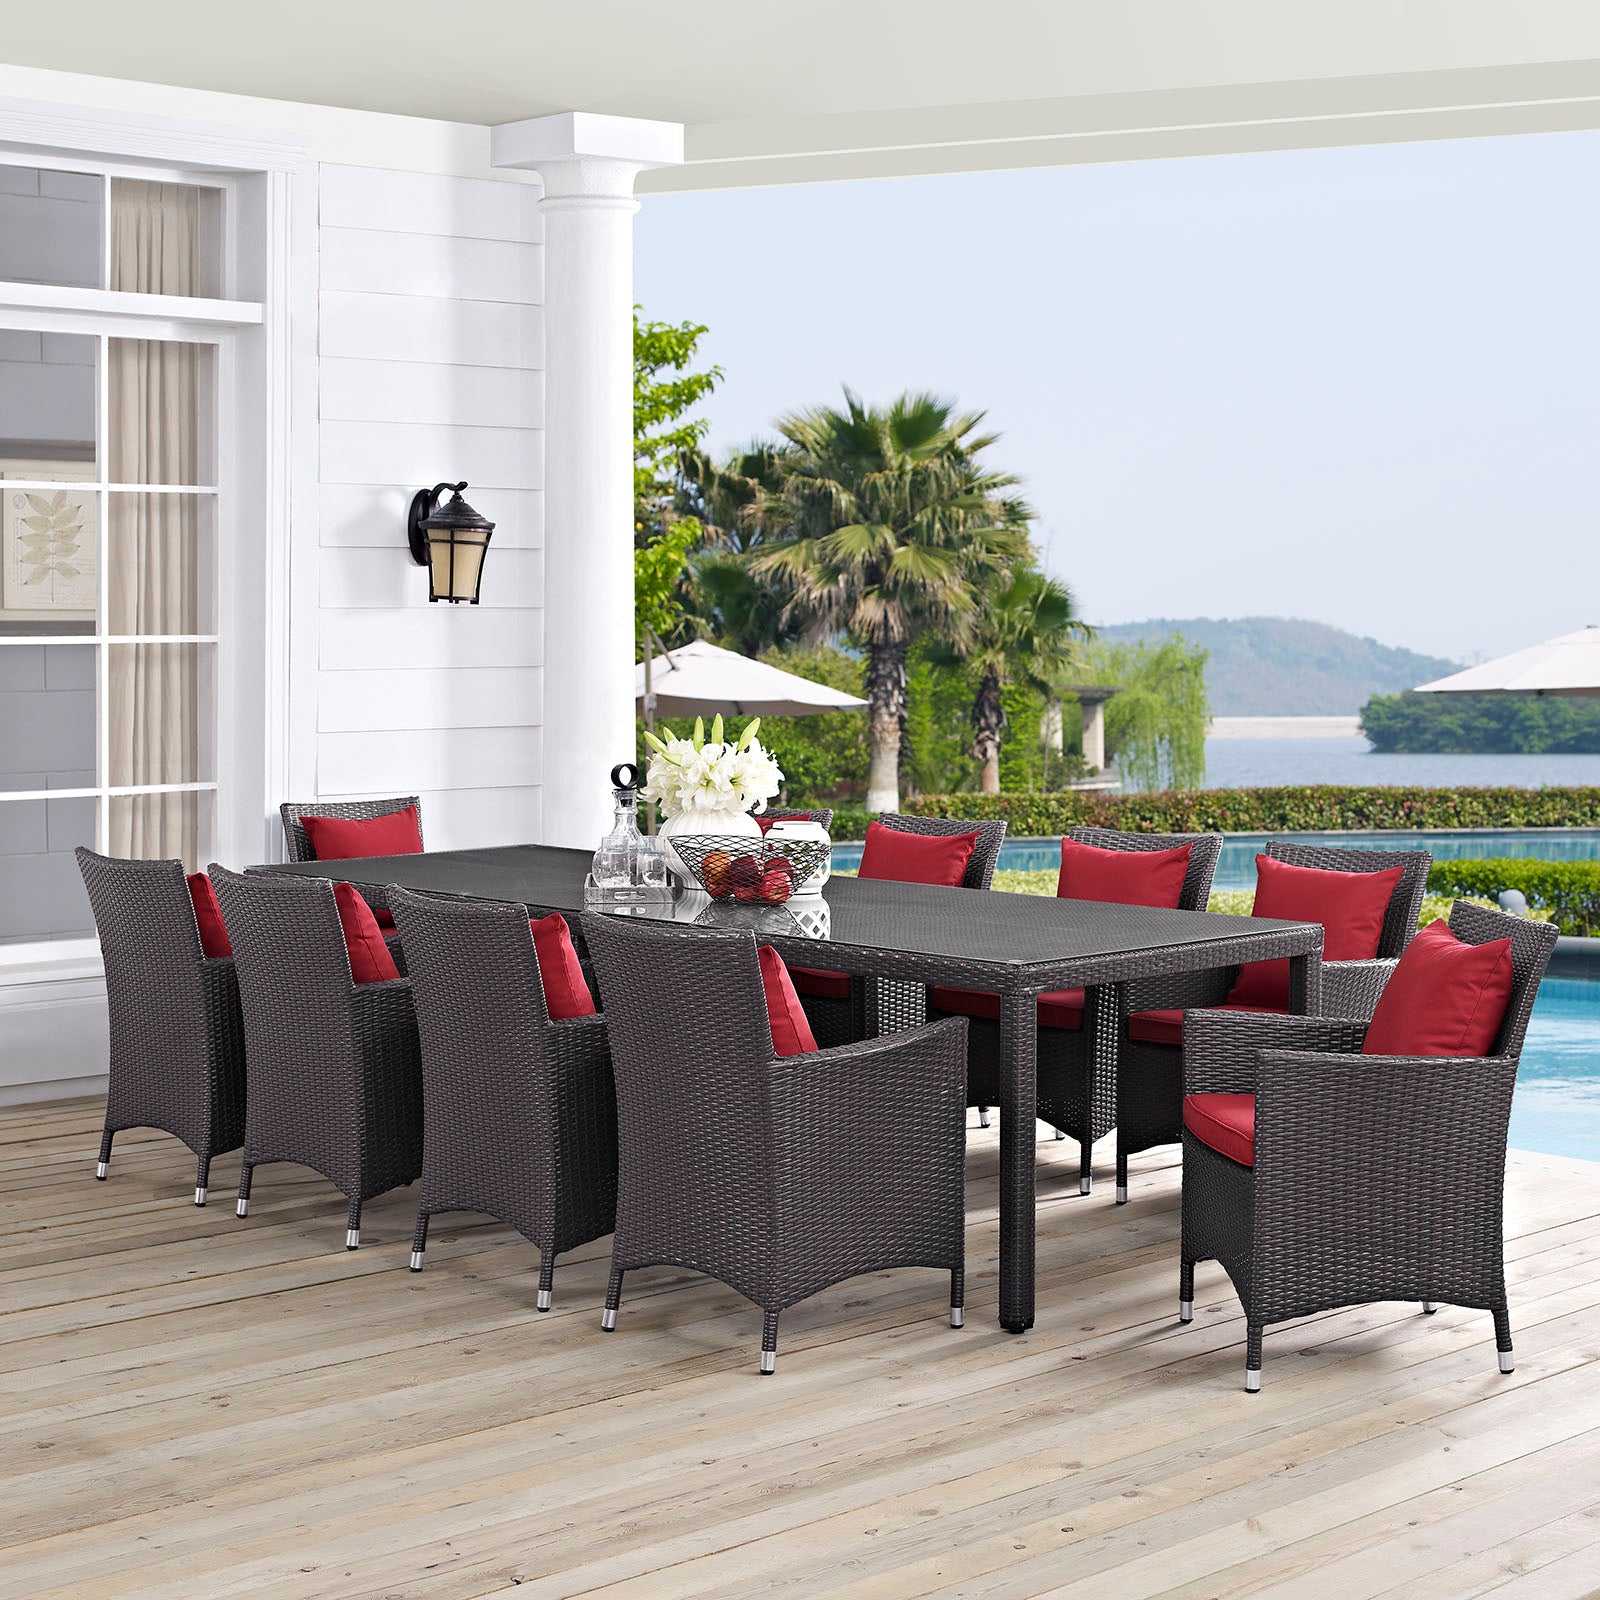 Modway Outdoor Dining Sets - Convene 11 Piece Outdoor Patio Dining Set Espresso Red 165"